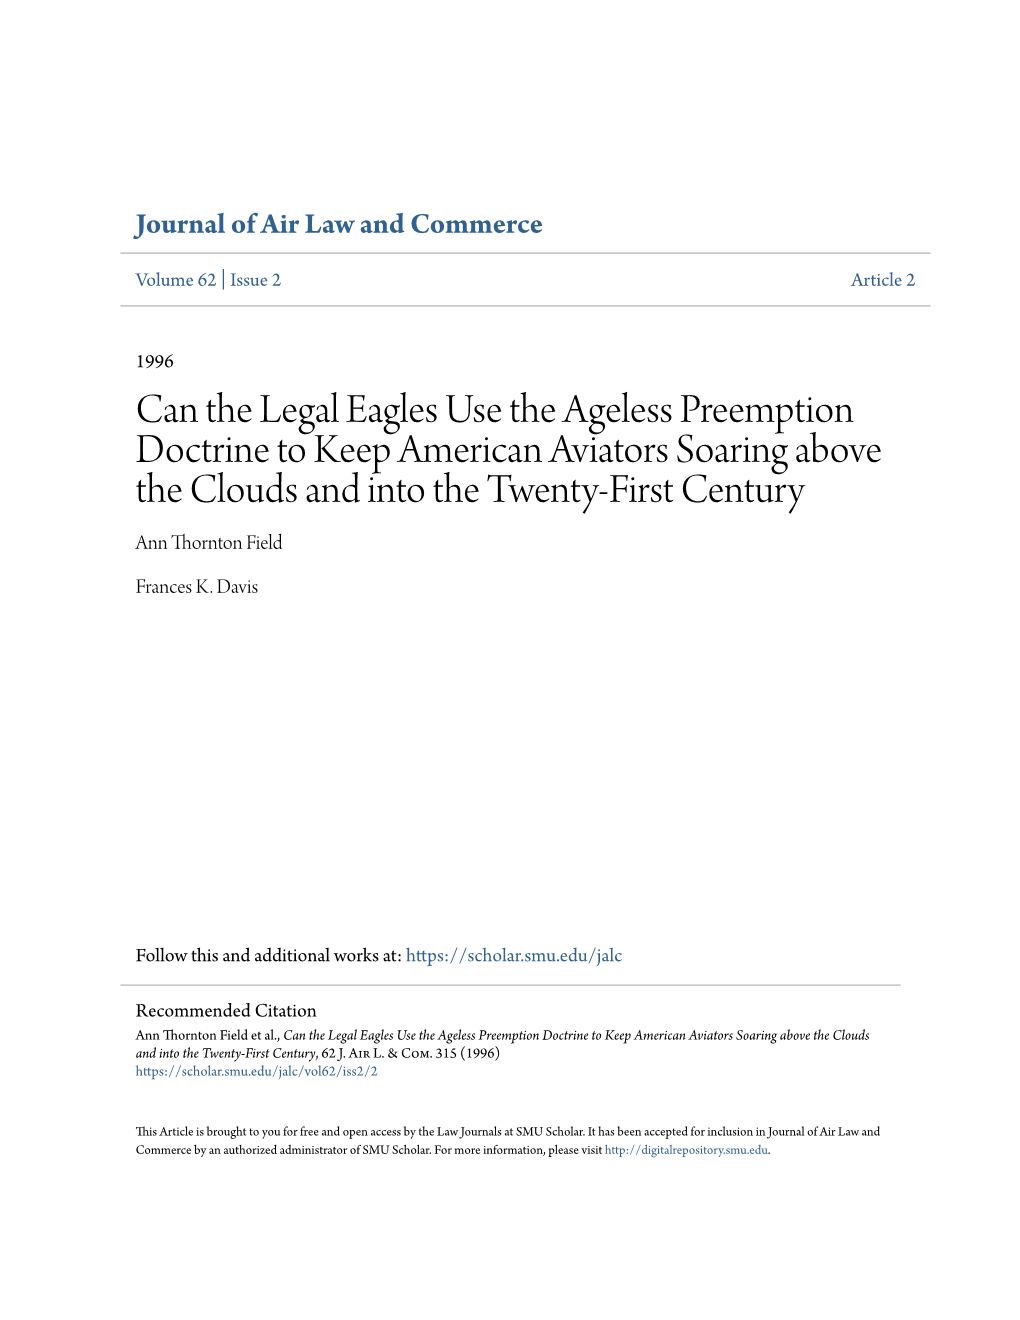 Can the Legal Eagles Use the Ageless Preemption Doctrine to Keep American Aviators Soaring Above the Clouds and Into the Twenty-First Century Ann Thornton Field